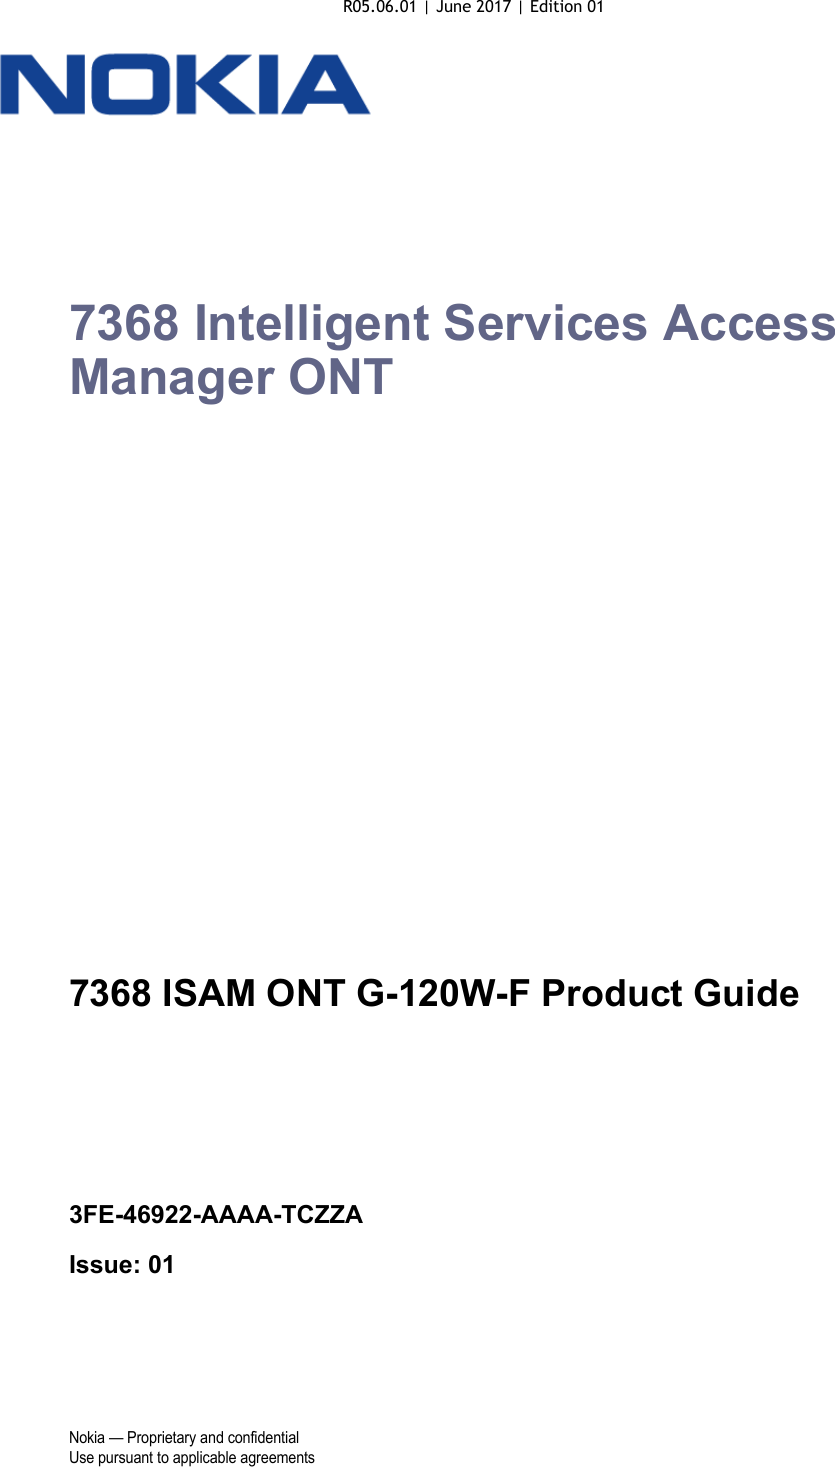 Nokia — Proprietary and confidentialUse pursuant to applicable agreements 7368 Intelligent Services Access Manager ONT7368 ISAM ONT G-120W-F Product Guide3FE-46922-AAAA-TCZZAIssue: 01 7368 ISAM ONT G-120W-F Product GuideR05.06.01 | June 2017 | Edition 01 